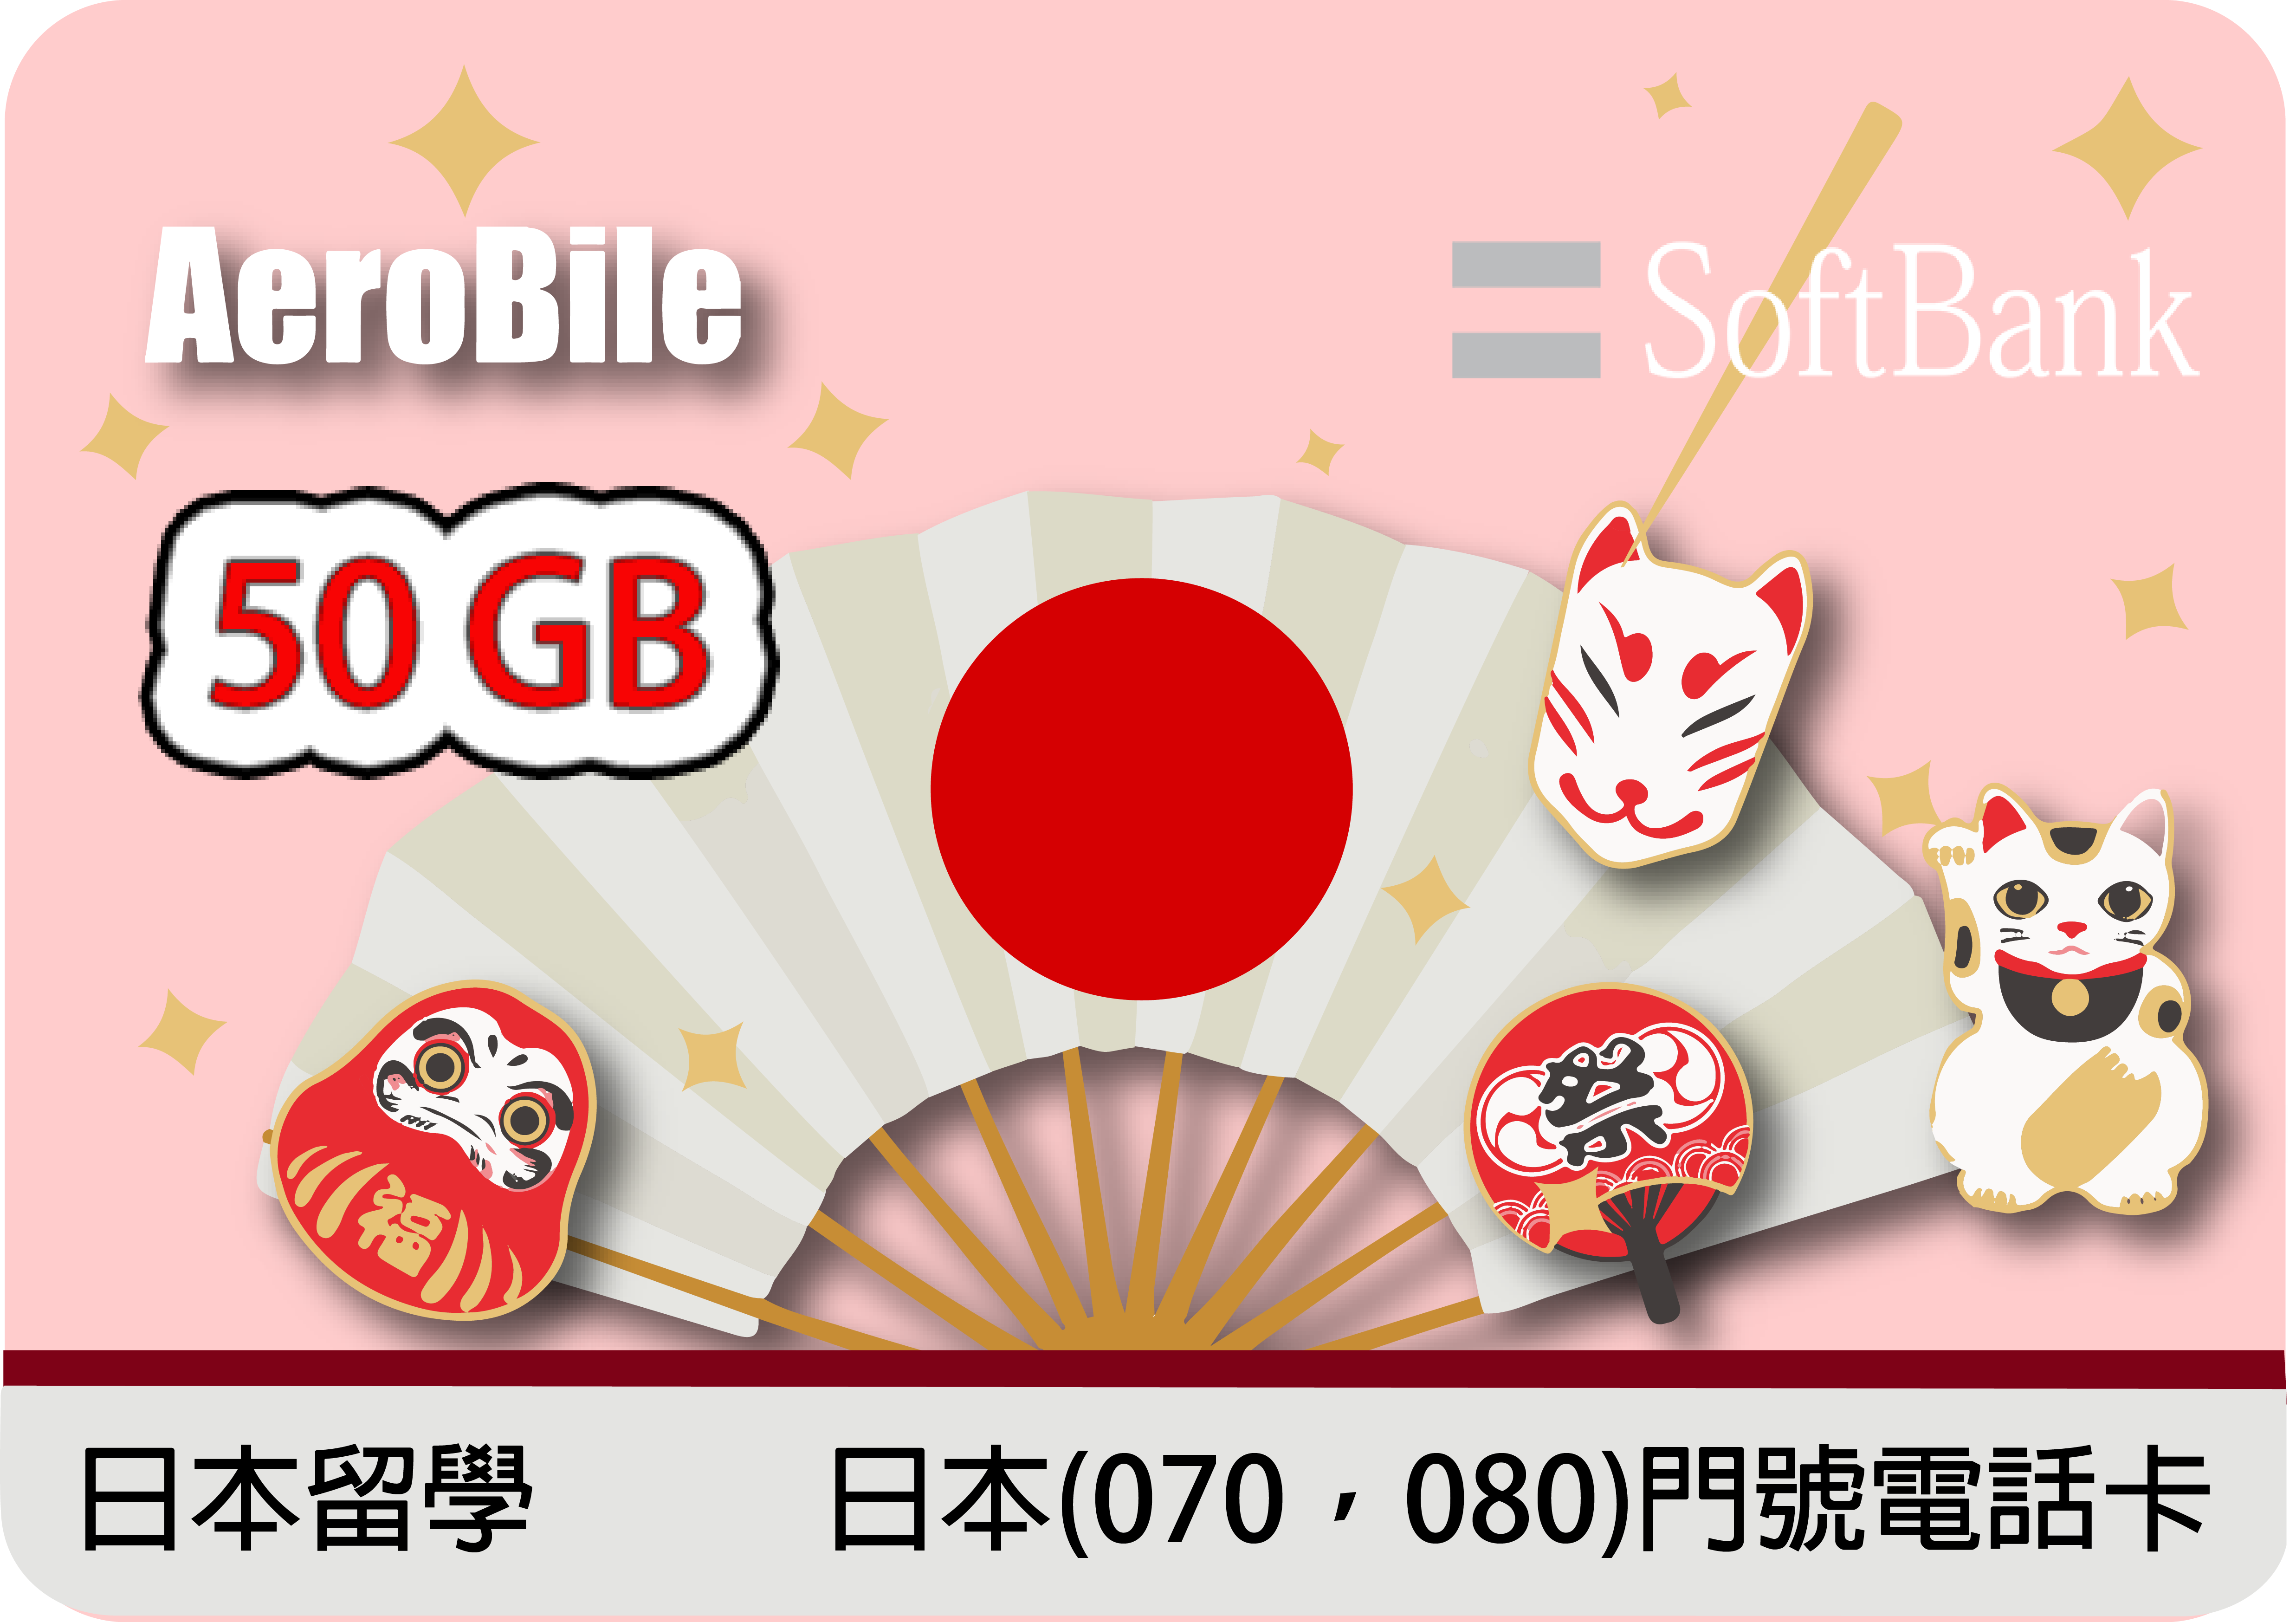 Japan Softbank sim card with voice and data for long stay students or residents